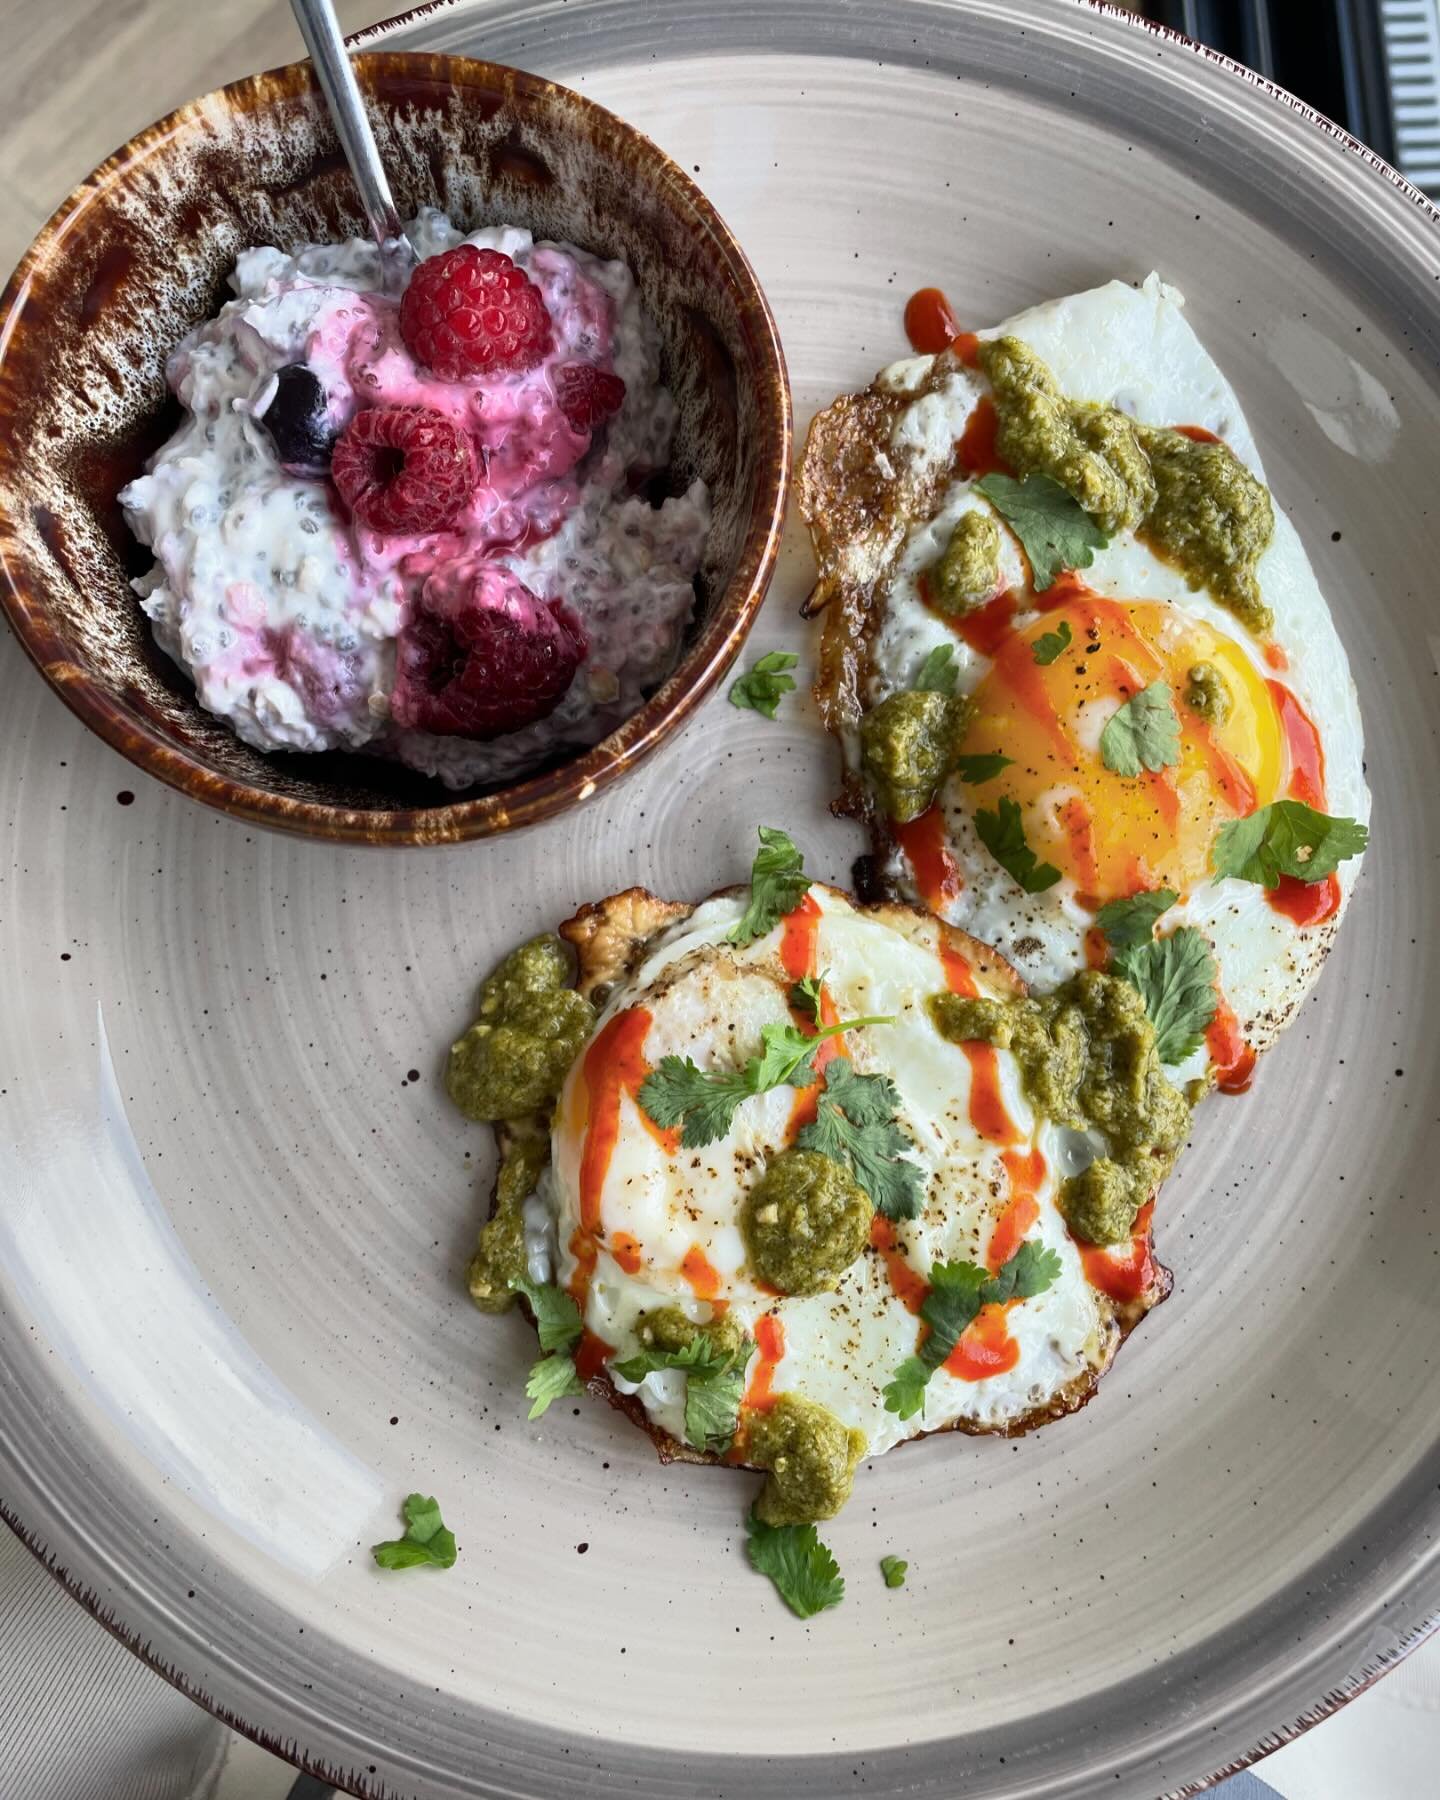 Some things I&rsquo;ve been making and eating lately 🥰&hellip;

1. overnight chia raspberry oats &amp; pesto eggs
2. dark chocolate chip banana bread
3. mackerel pasta salad for omega 3s &amp; mood
4. coconut chicken curry w/ sticky rice 
5. chocola